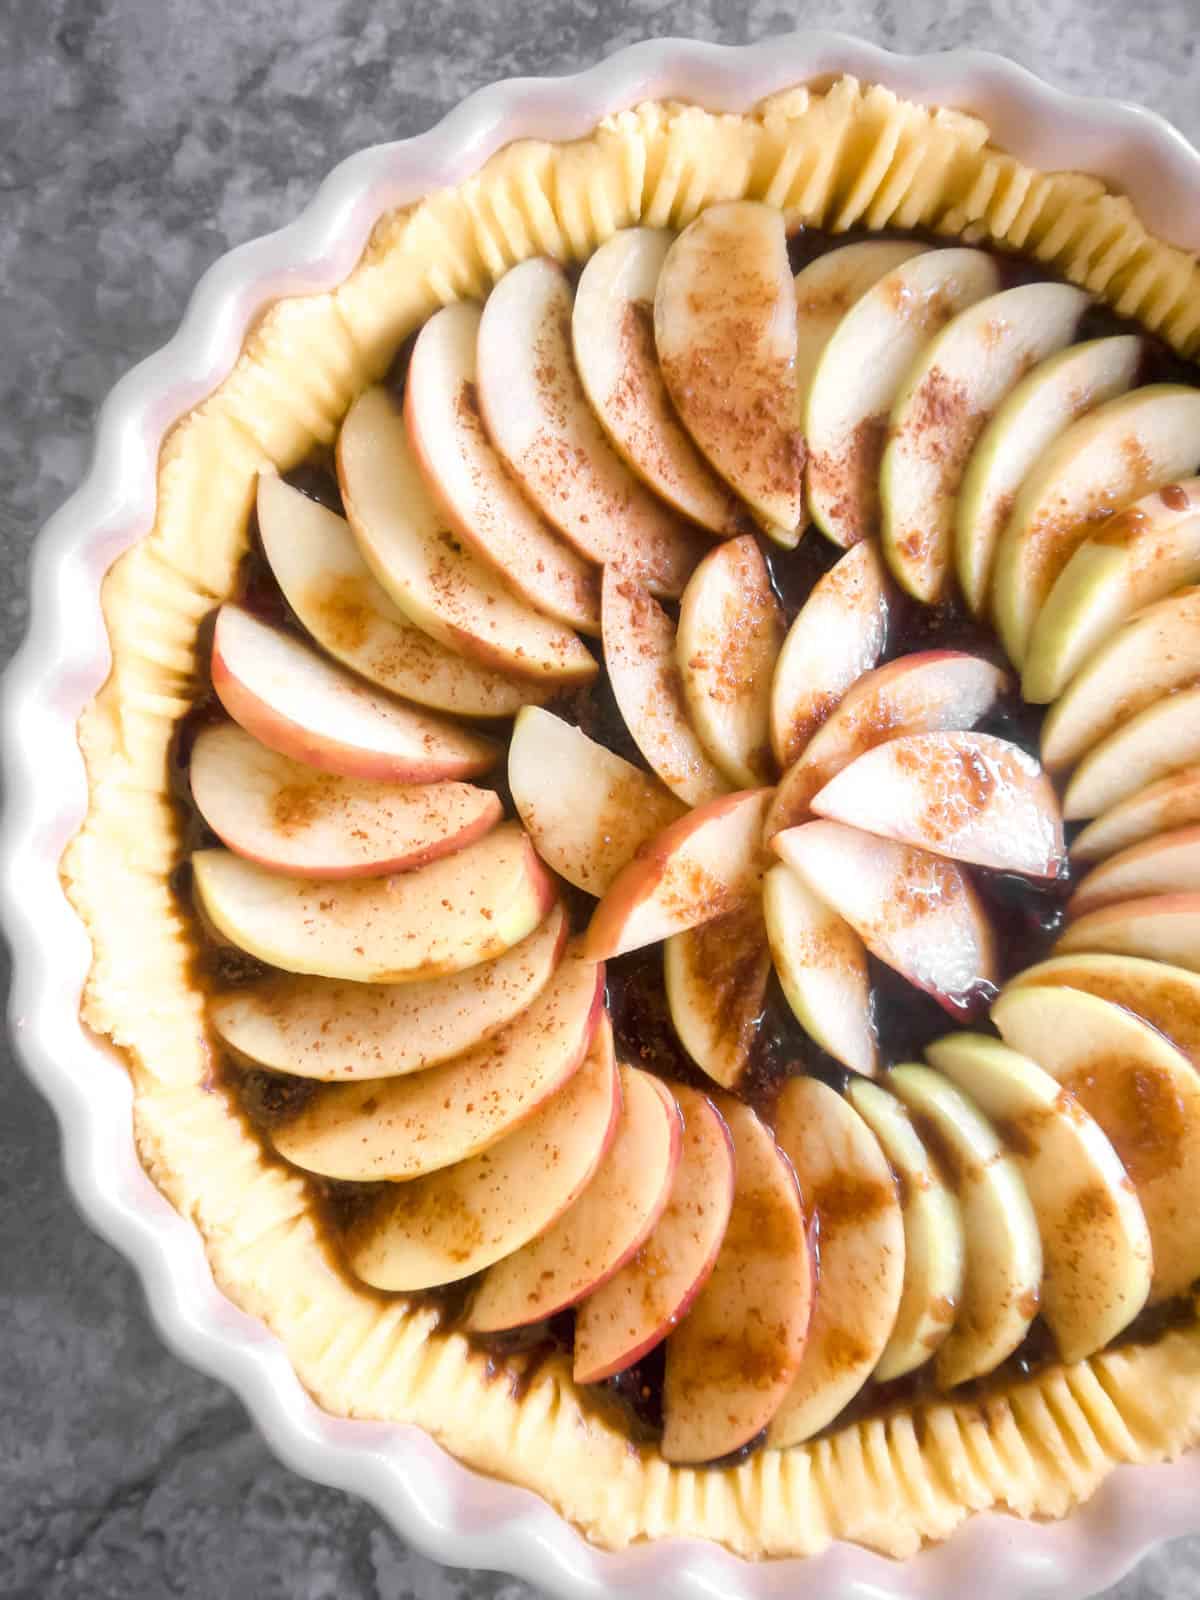 Apples added to the tart before baking.